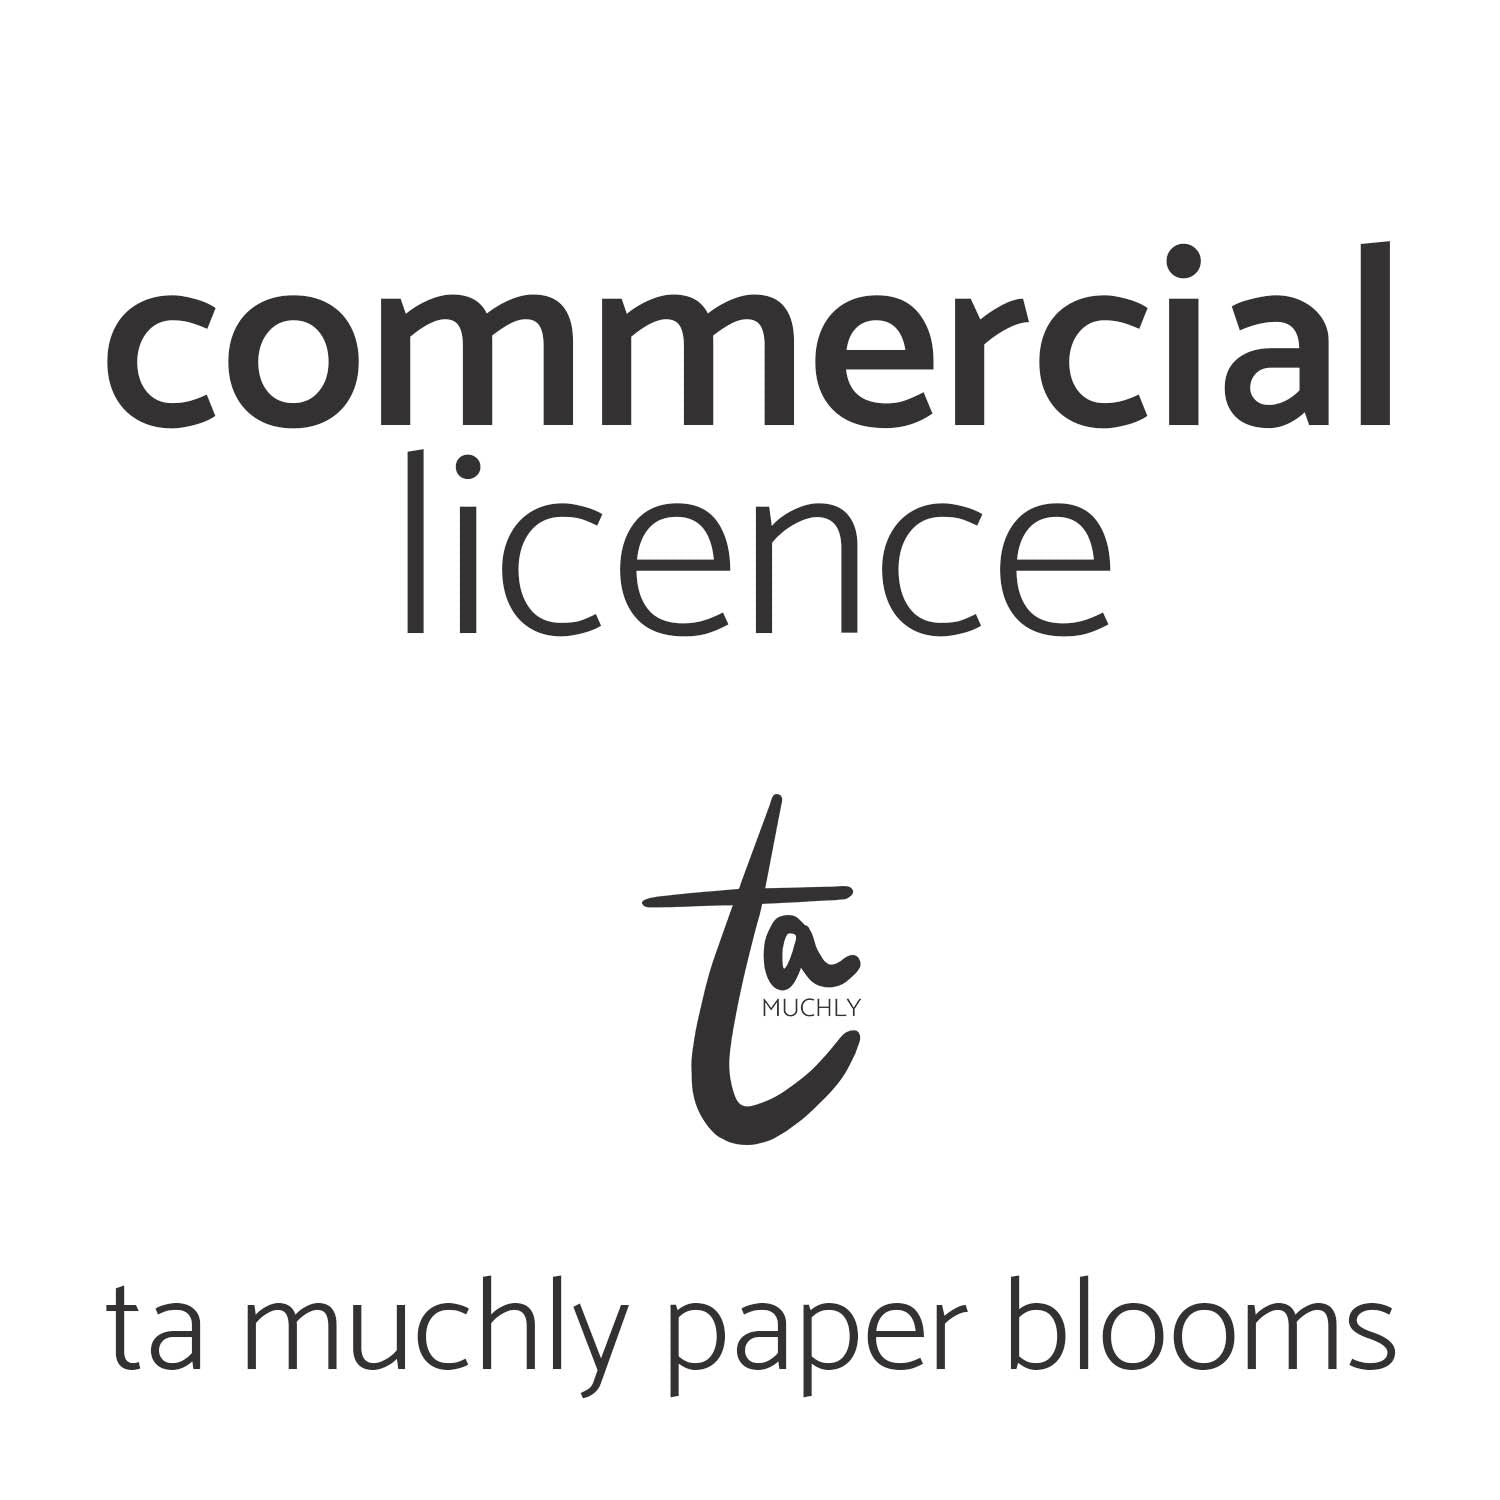 paper flower commercial licence